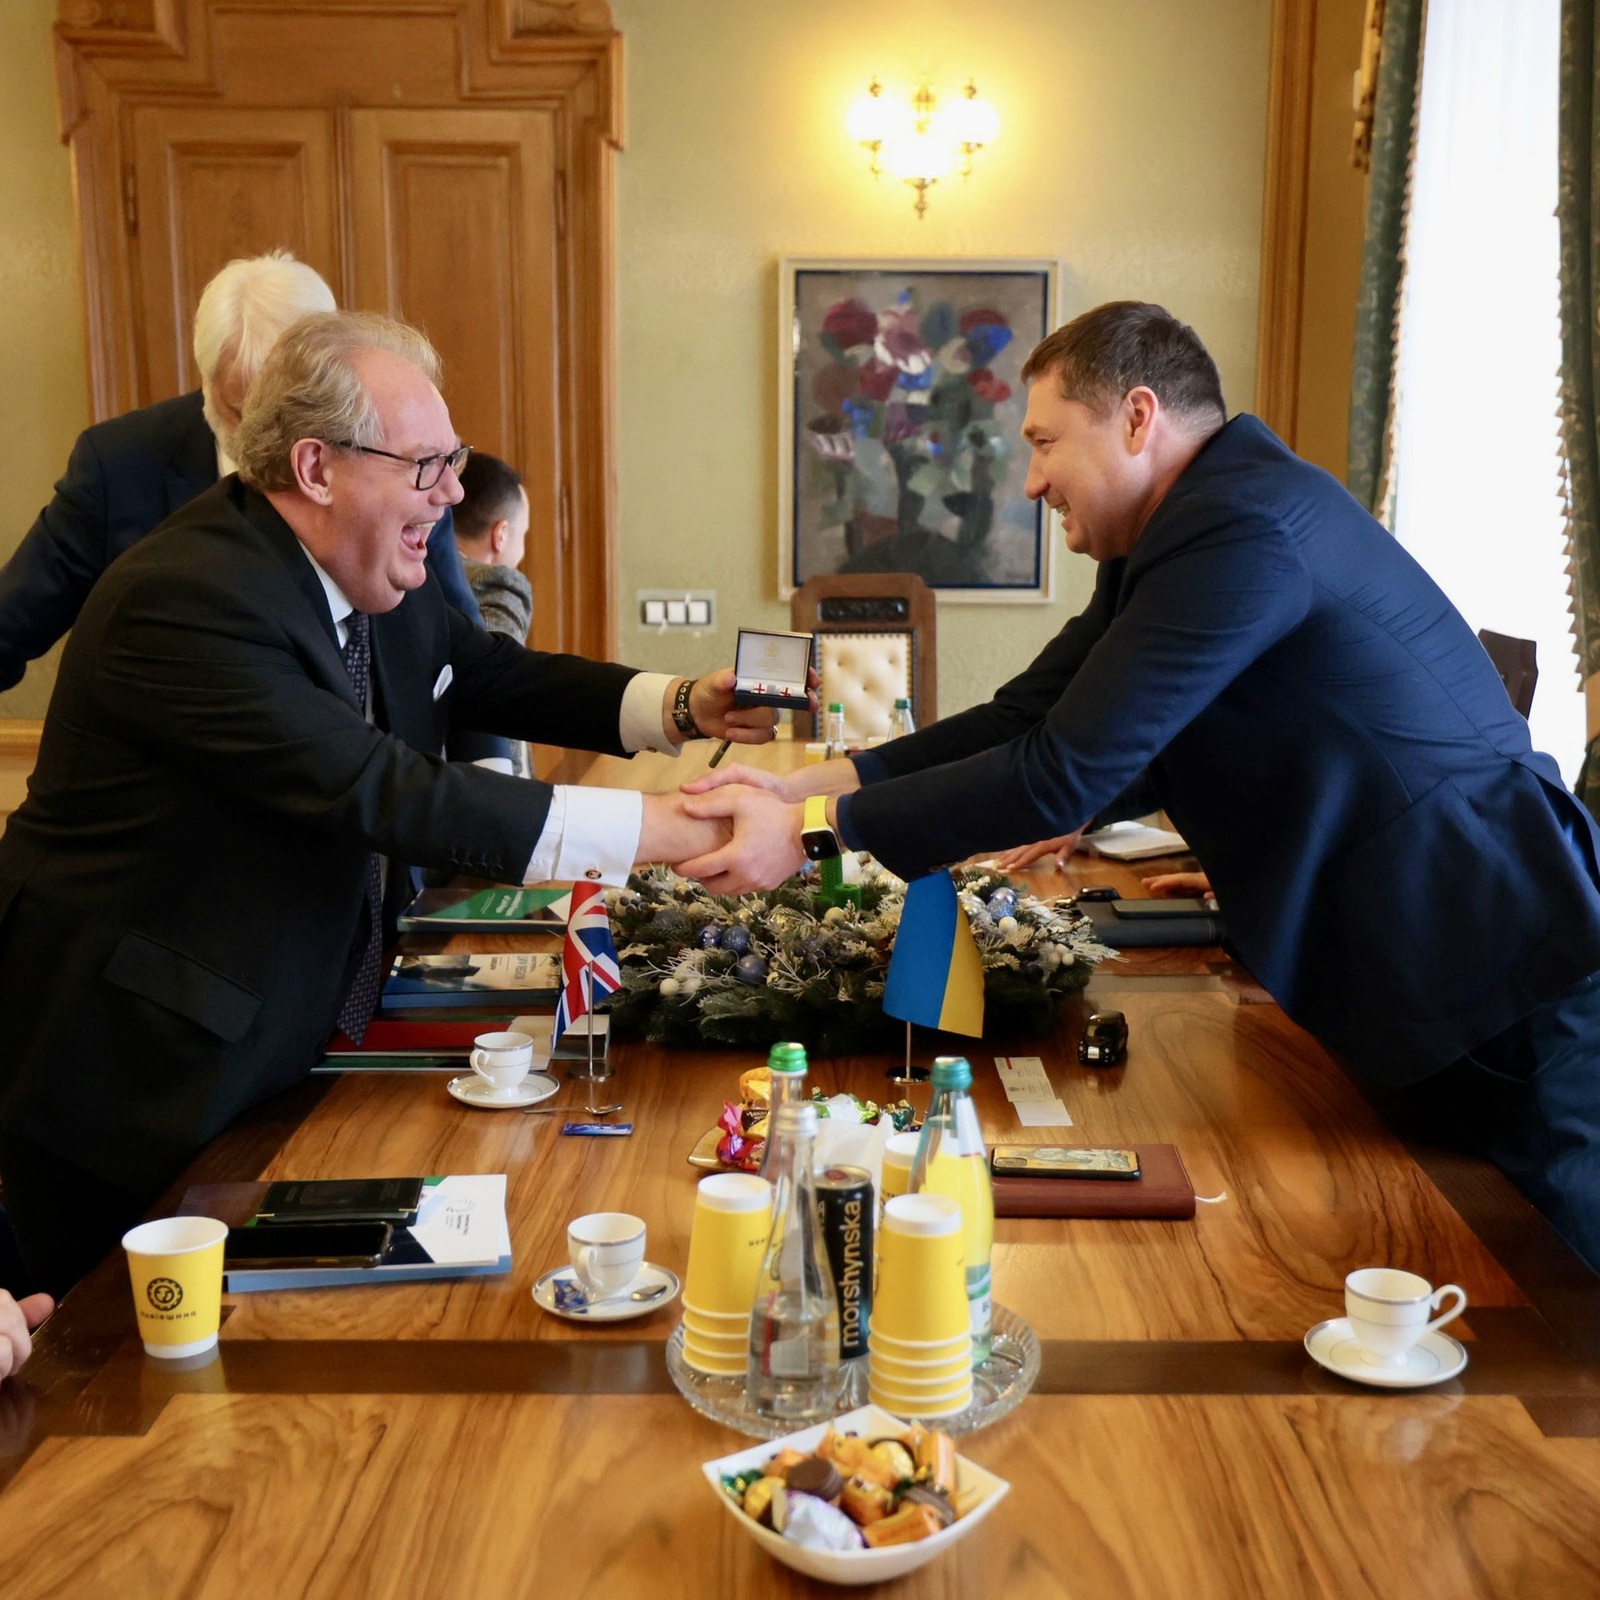 26 Jan 23- Met with Governor of the Lviv District, who has control over all the civilian and military aspects of the area. Lviv saw the population increase from 2.7 to 3.1m, with some 600k Internally Displaced Persons to be cared for.